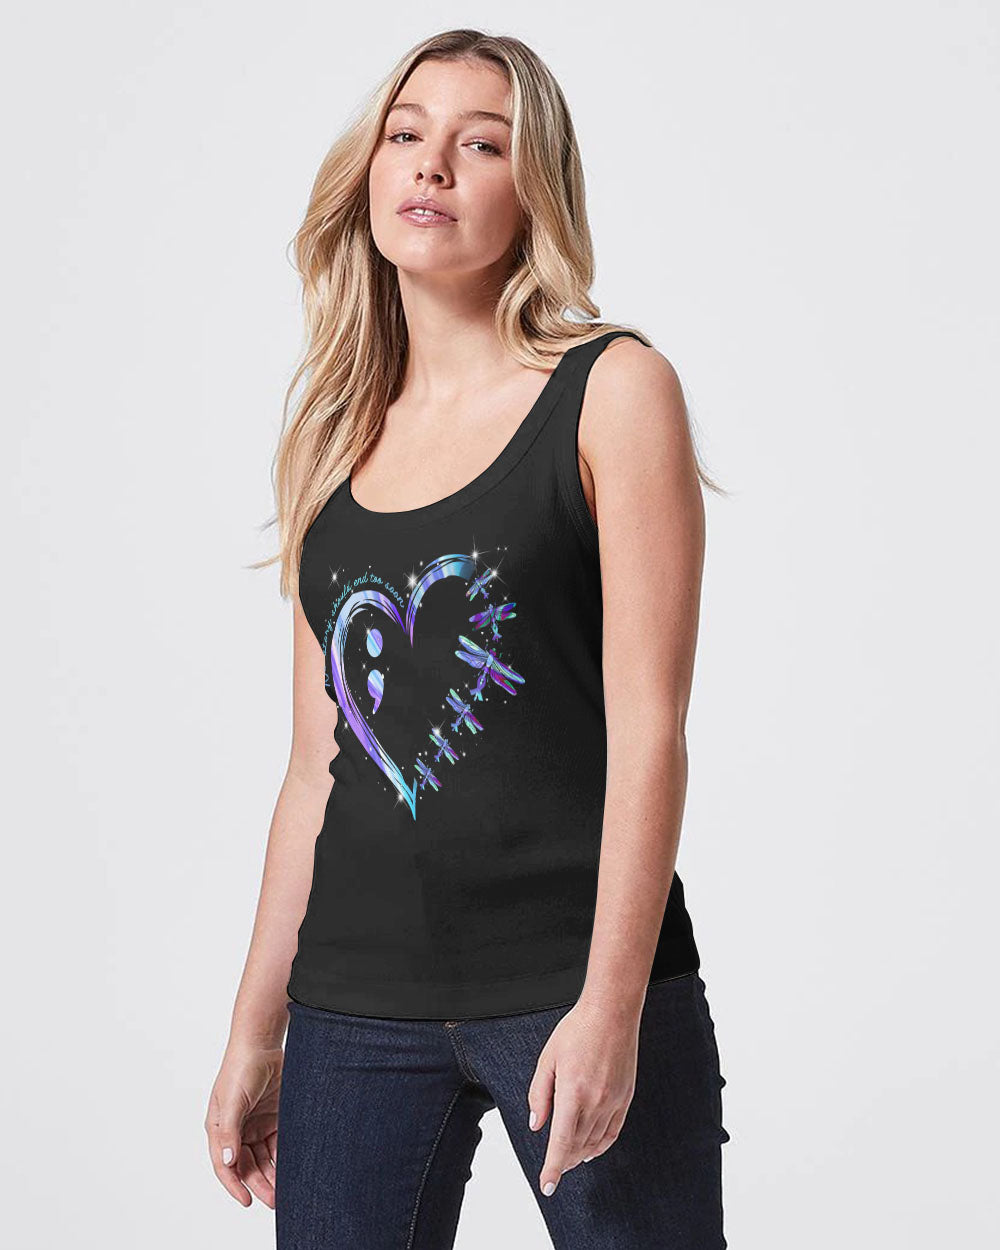 Dragonfly Fight Holographic Flag Women's Suicide Prevention Awareness Tanks